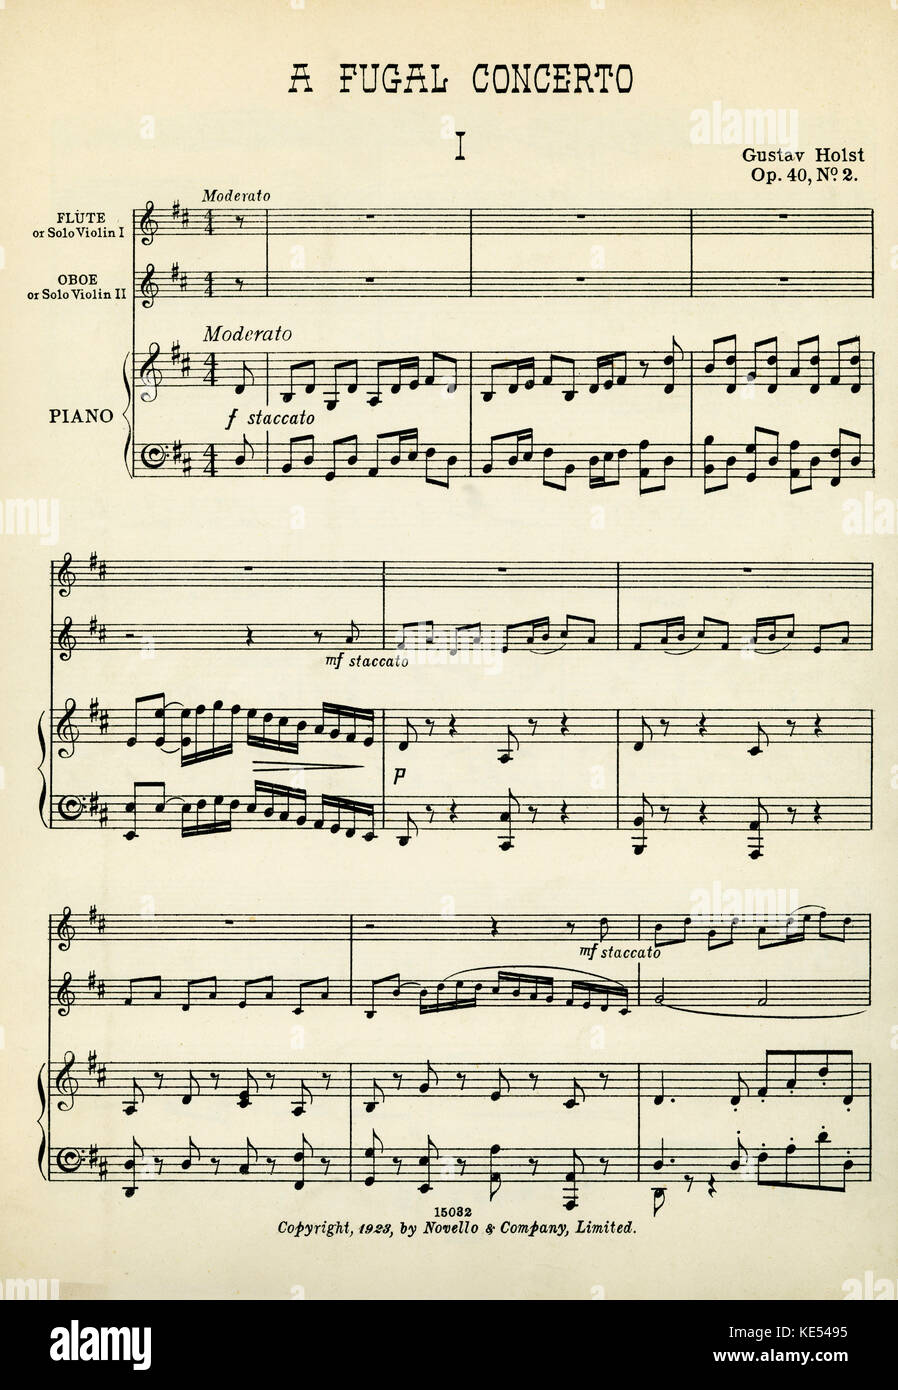 Gustav Holst Gustav Holst - Opening page of score. A Fugal Concerto for flute and oboe (or two solo violins) with accompaniment for string orchestra. Published by Novello & Co., Ltd., 1923. English composer: 21 September 1874 – 25 May 1934. Stock Photo